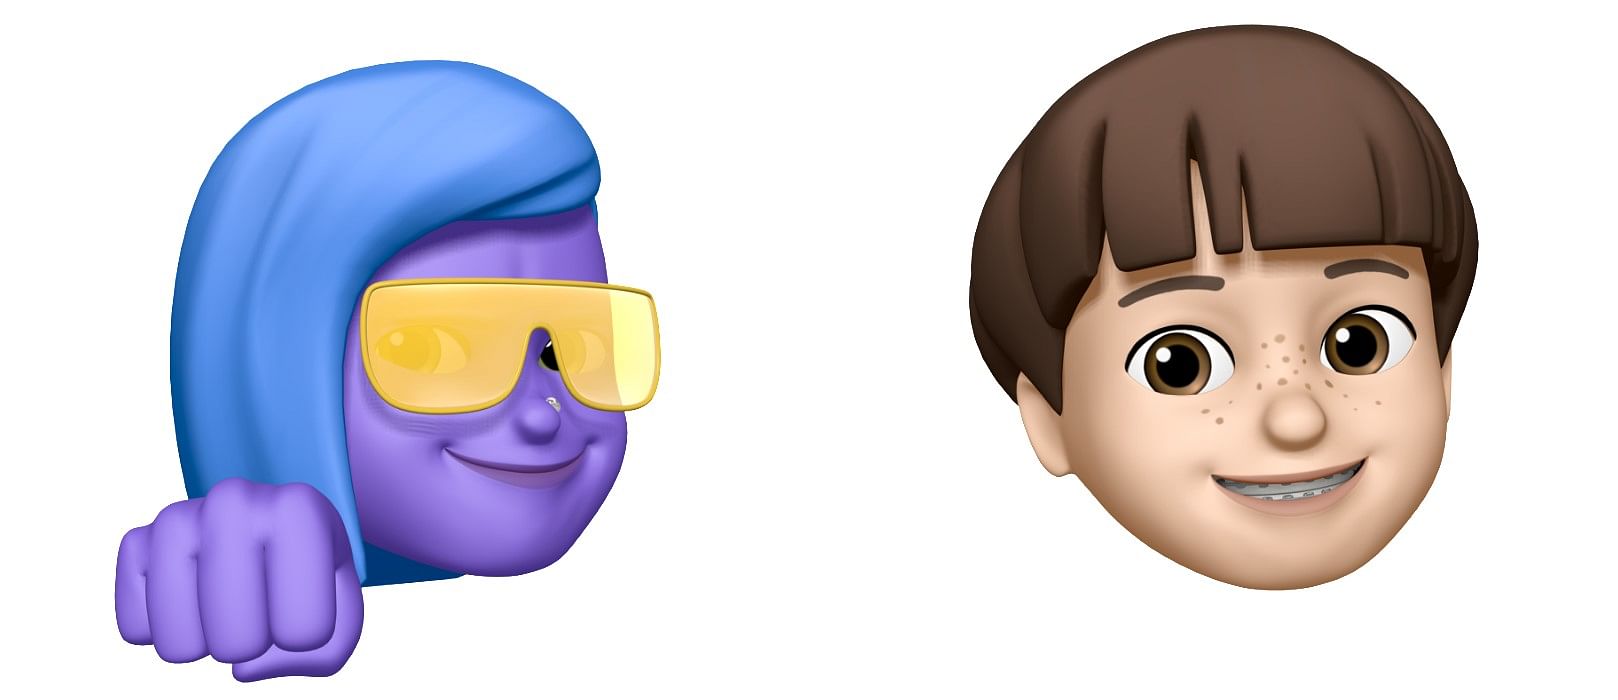 New Memojis coming in new Apple software this fall. Credit: Apple